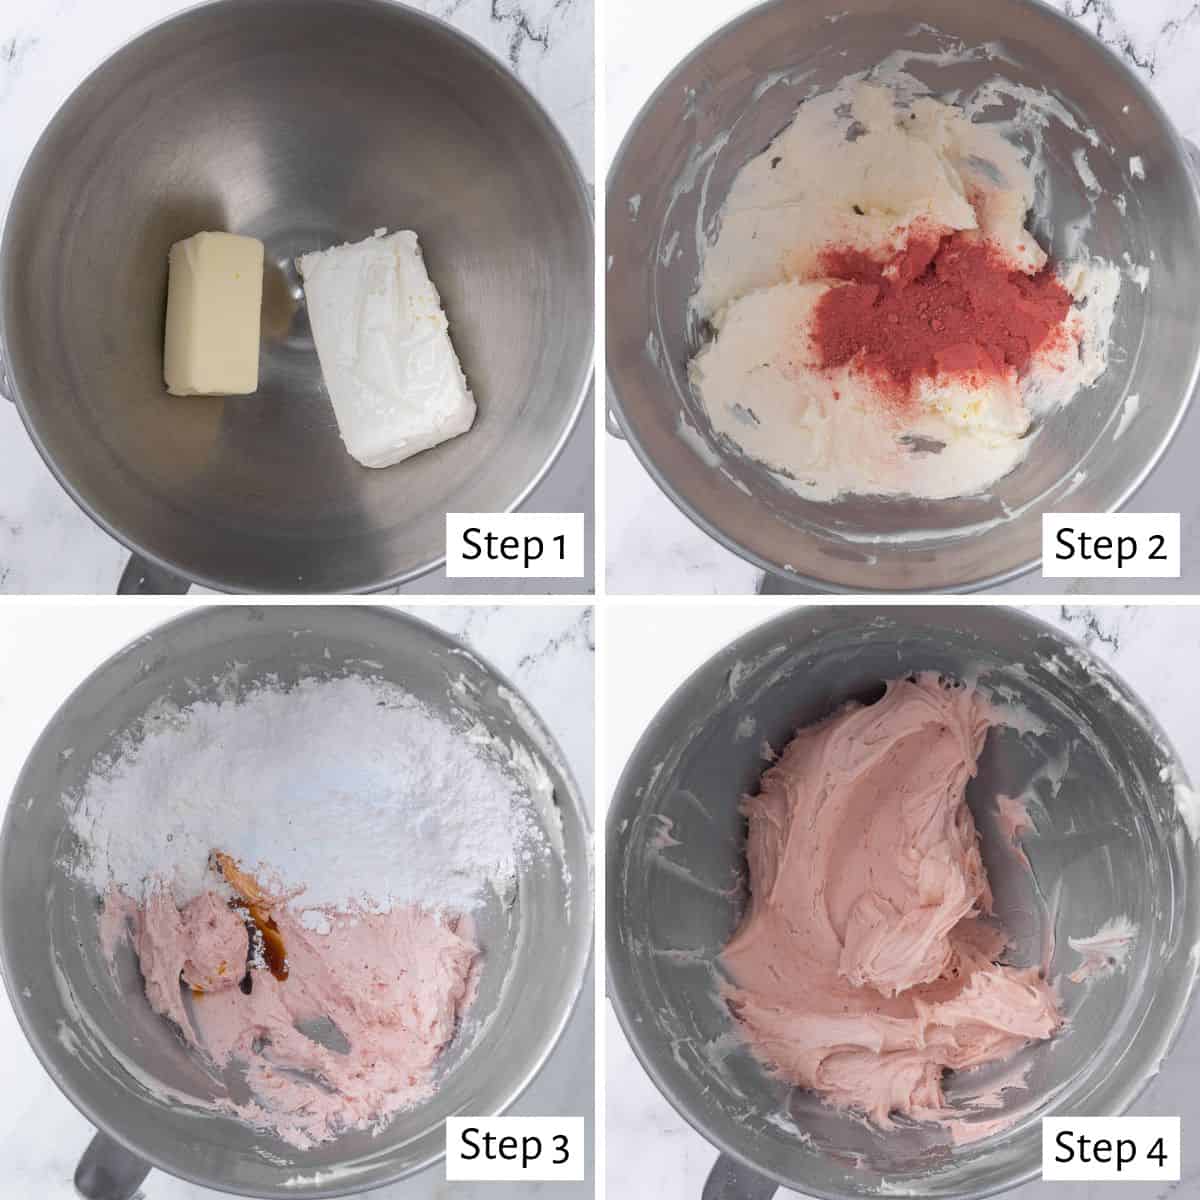 4-image collage of making frosting: 1 - cream cheese and butter in the mixing bowl; 2 - strawberry powder added; 3 - vanilla and powdered sugar added; 4 - after smooth, light, and fully mixed.